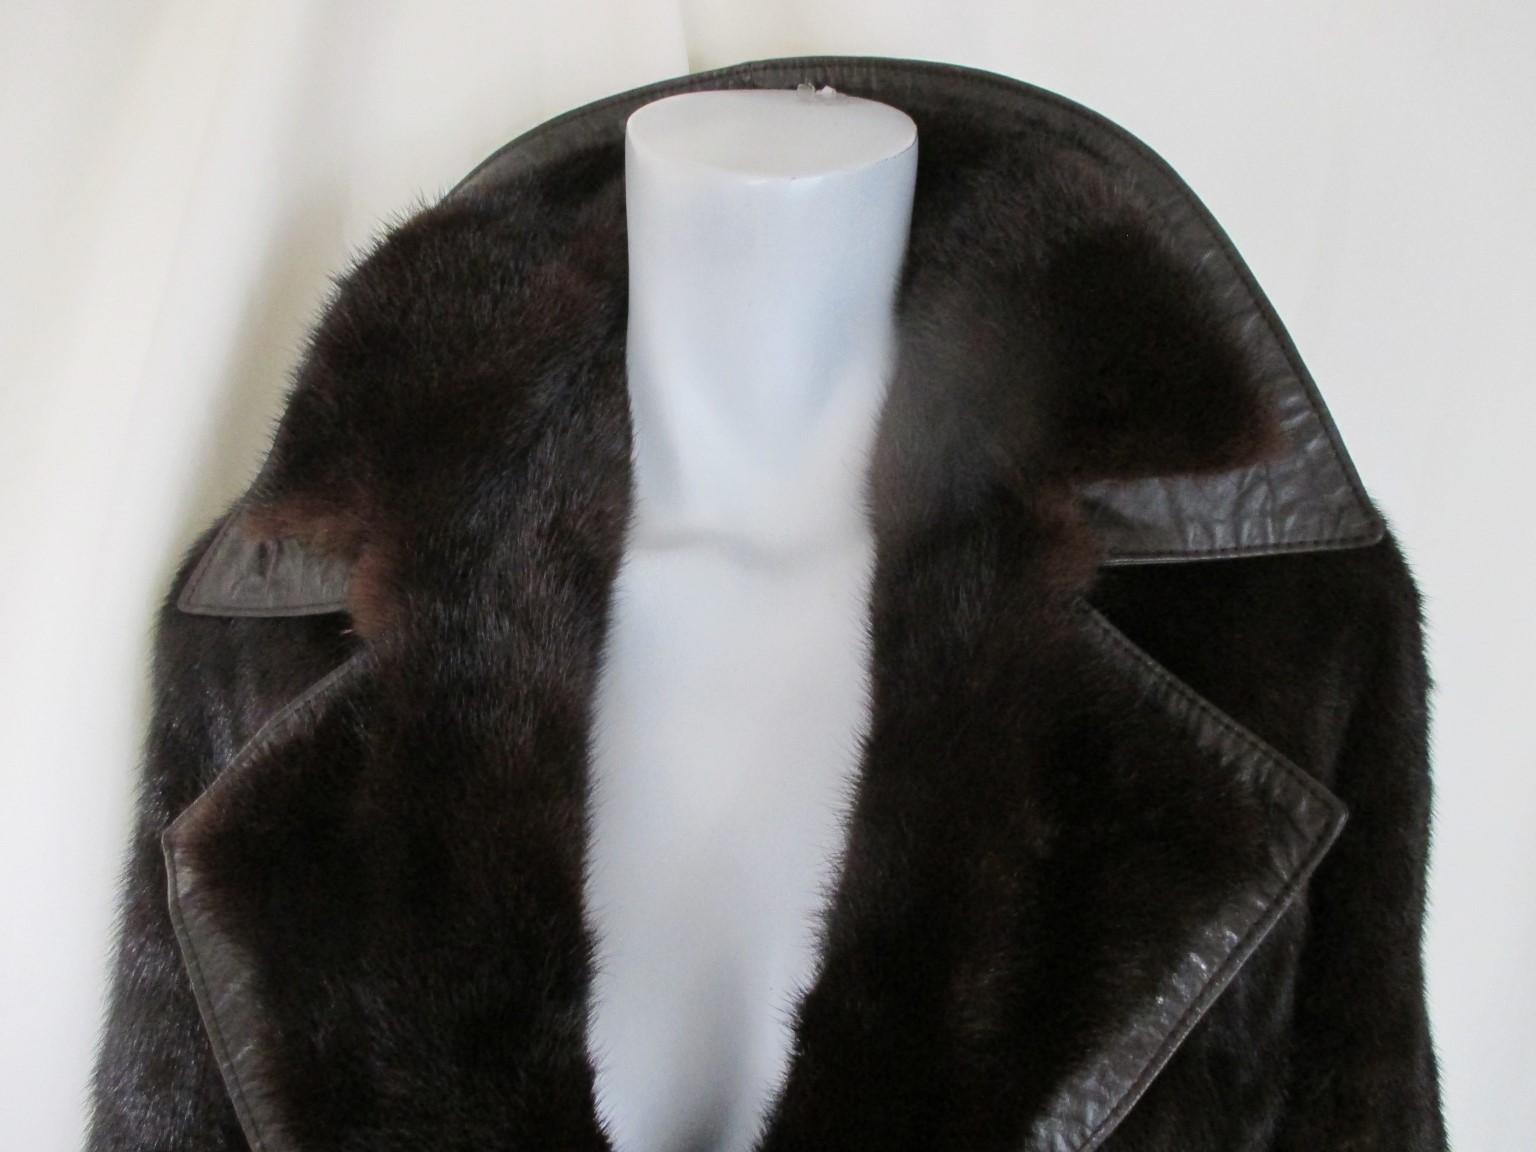 This vintage coat is made of brown mink fur with brown leather side panels and a leather belt.
The coat has 2 closing hooks and 2 pockets.
Furrier:  Regina pelze, Germany
Its in fair vintage condition with some wear at the lining
Size is